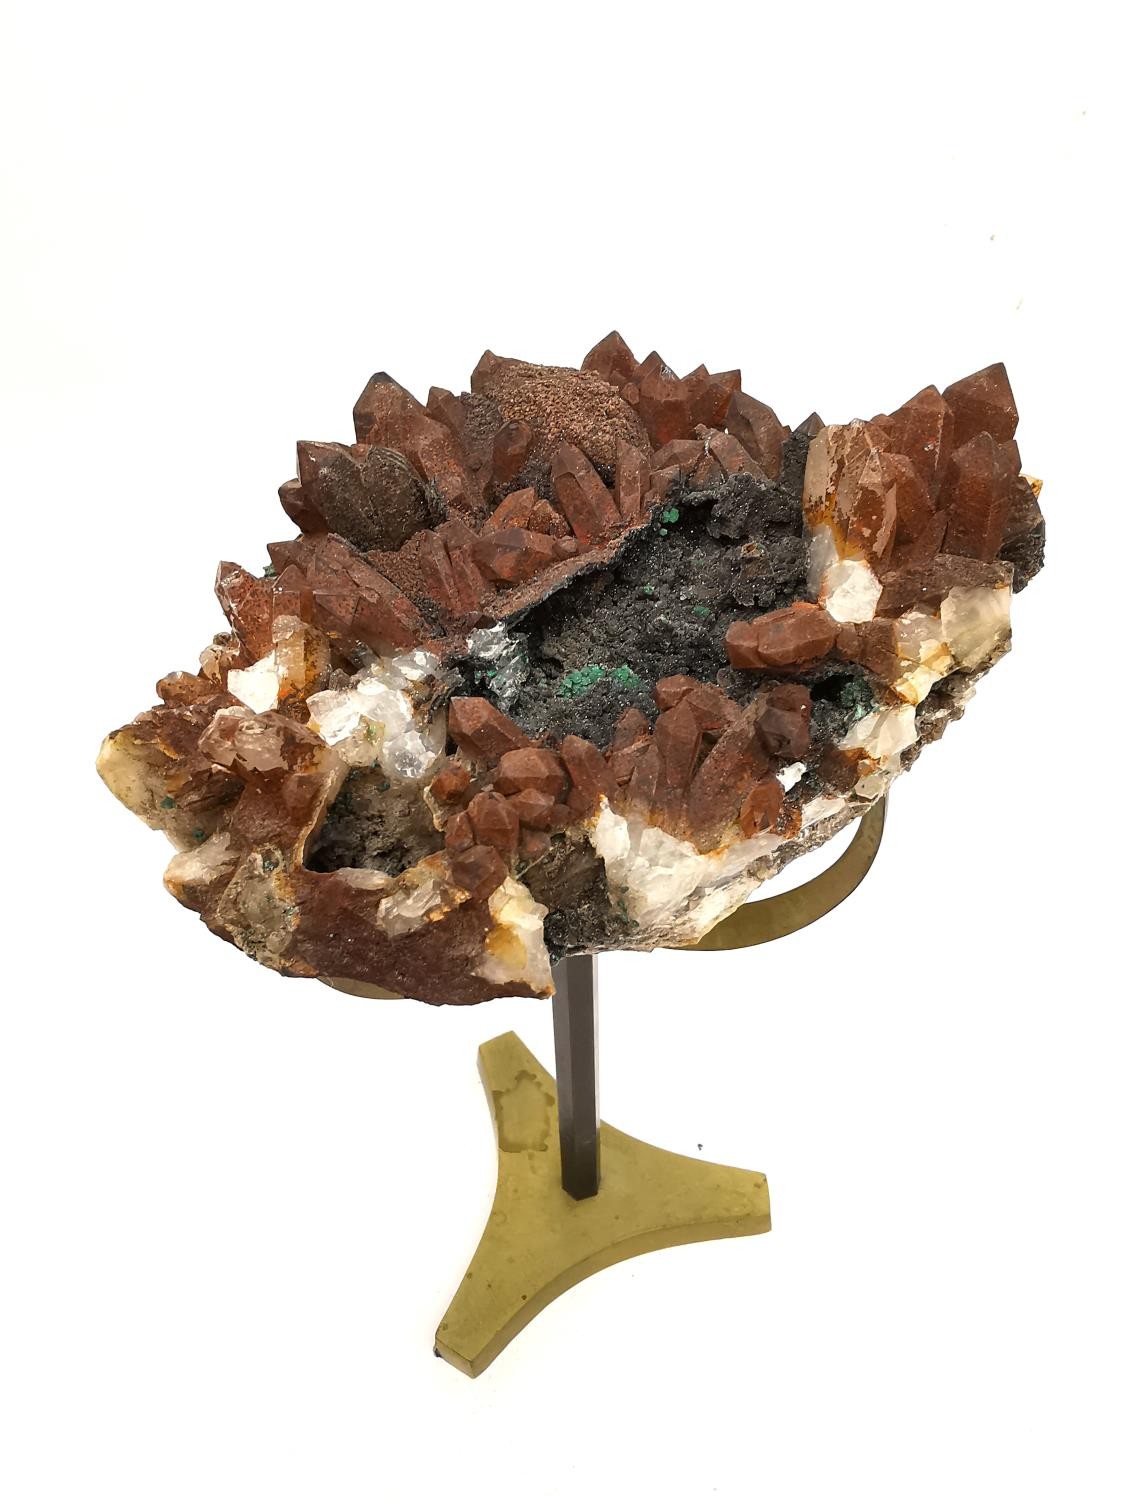 A Limonite stained quartz and malachite crystal specimen from Durango, Mexico. Mounted on brass - Image 3 of 8